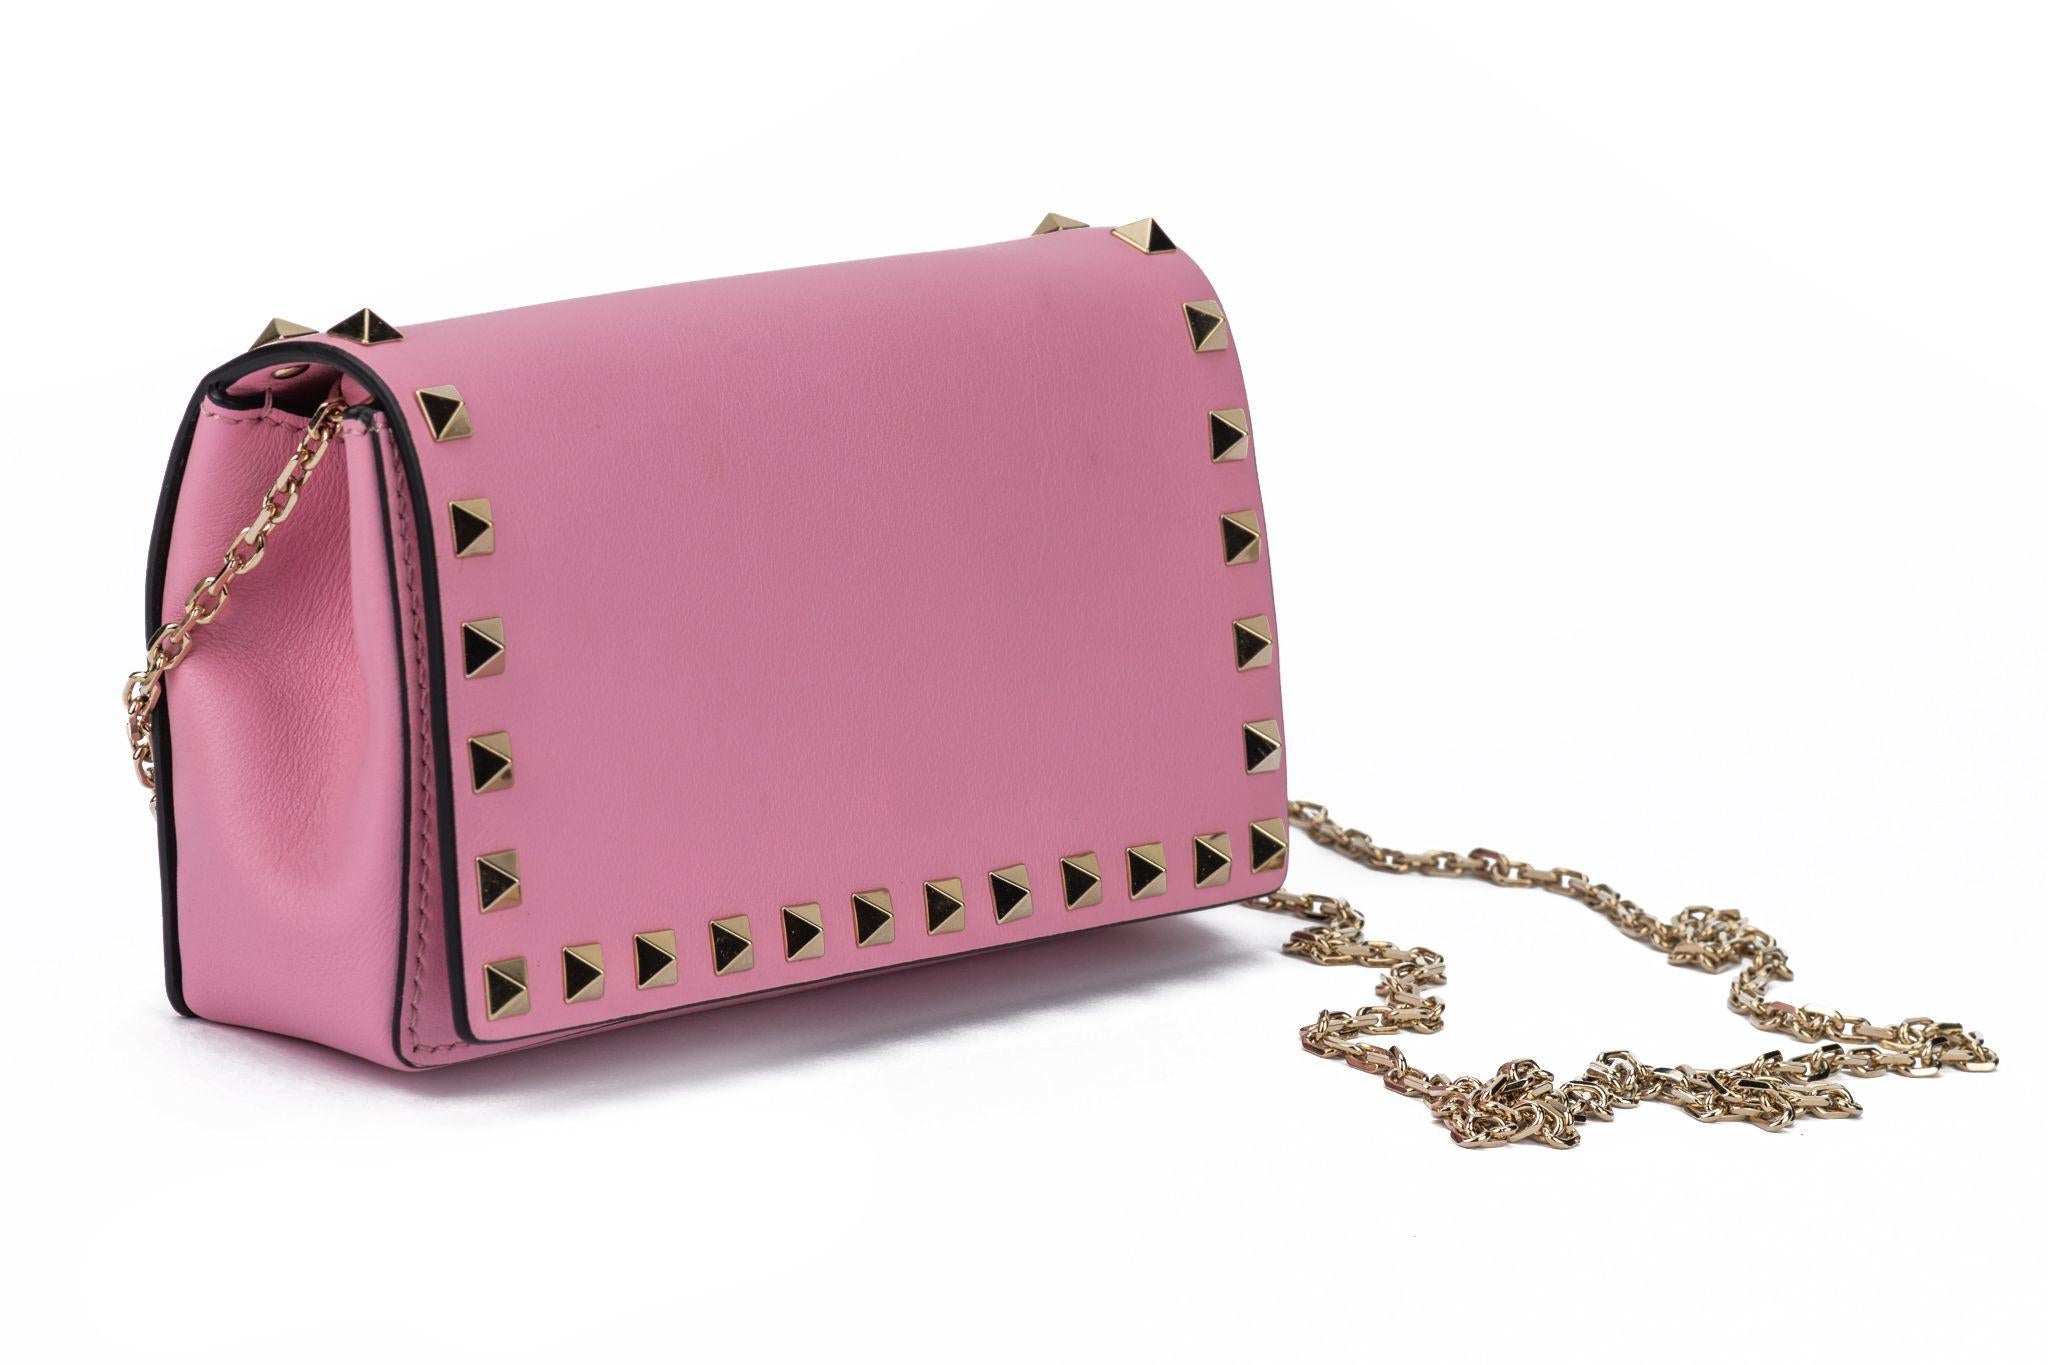 Valentino Chain Leather Crossbody Bag in pink lambskin leather with silver studs at the edges around the whole purse. The bag is new and comes with plastic on hardware and generic dustcover.